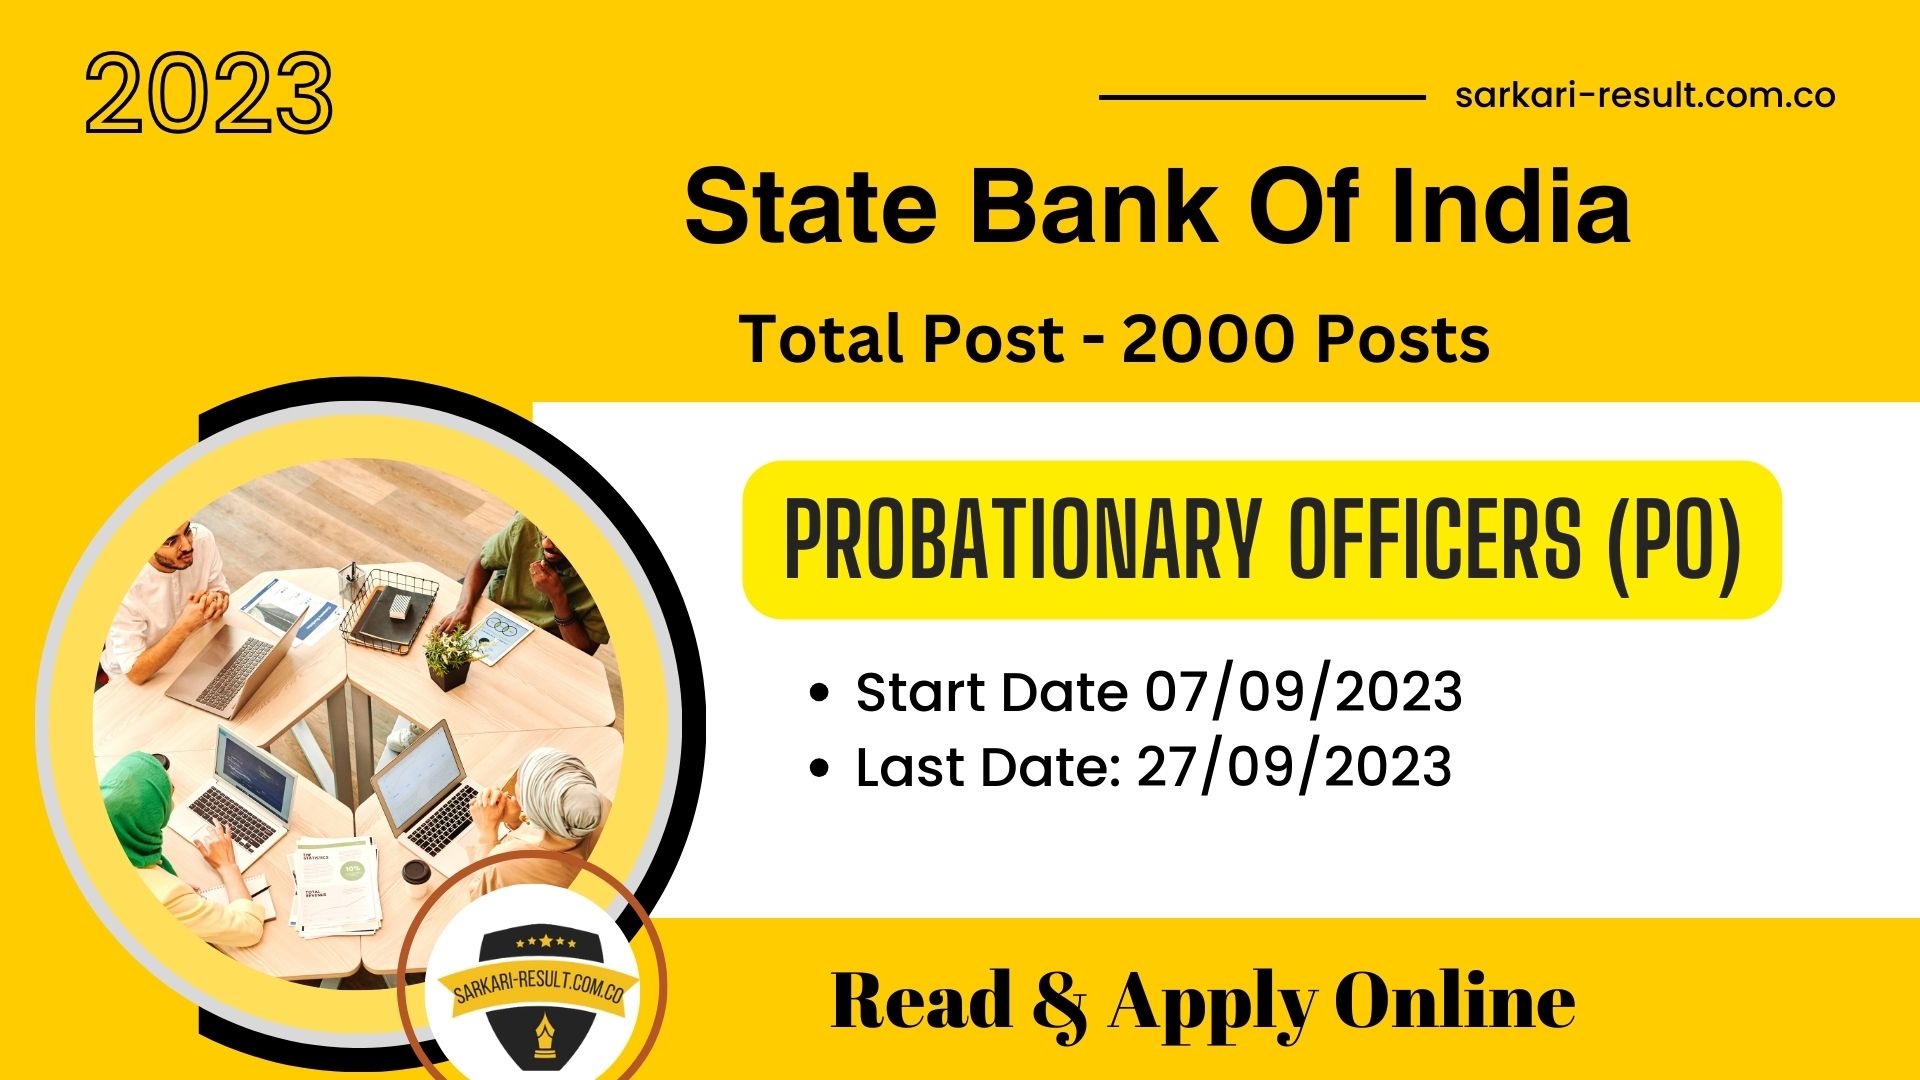 Apply Online State Bank of India SBI Probationary Officers PO Recruitment 2023 for 2000 Post